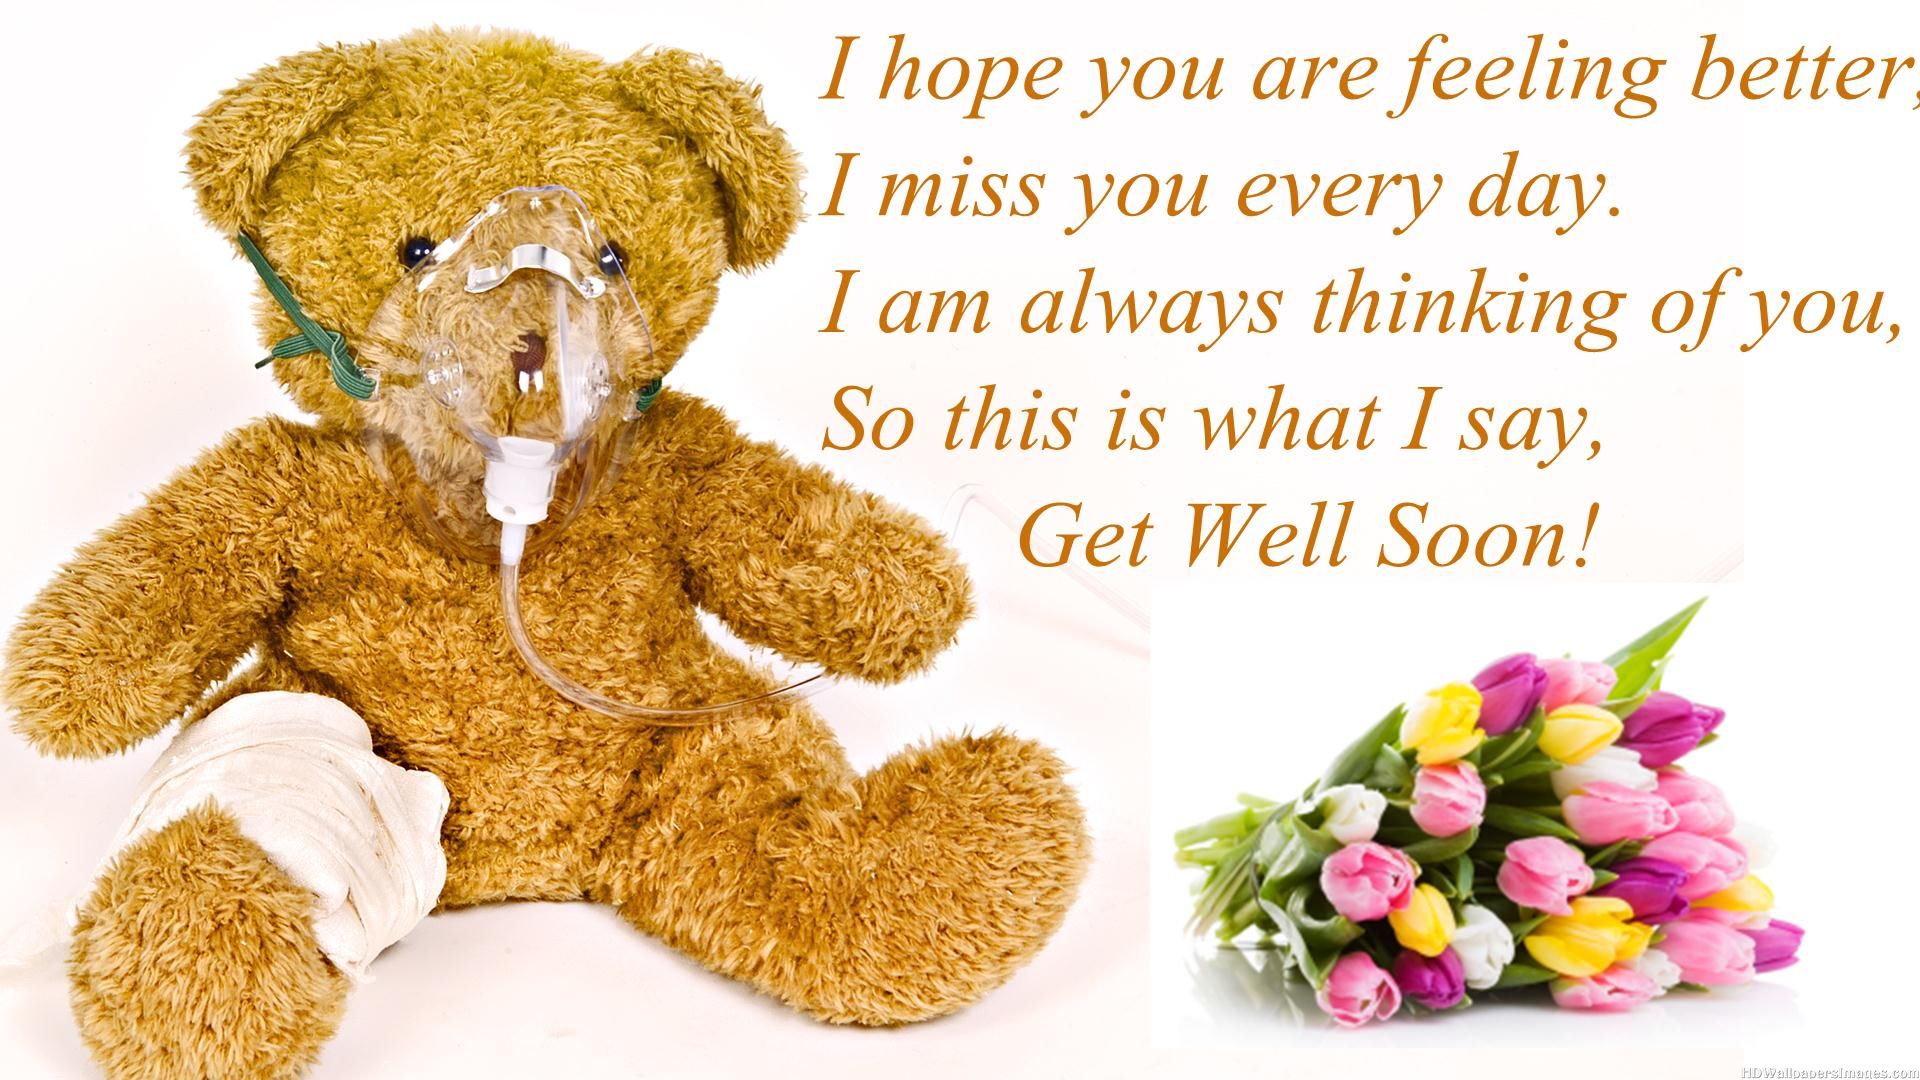 Feel Better Soon Quotes. QuotesGram